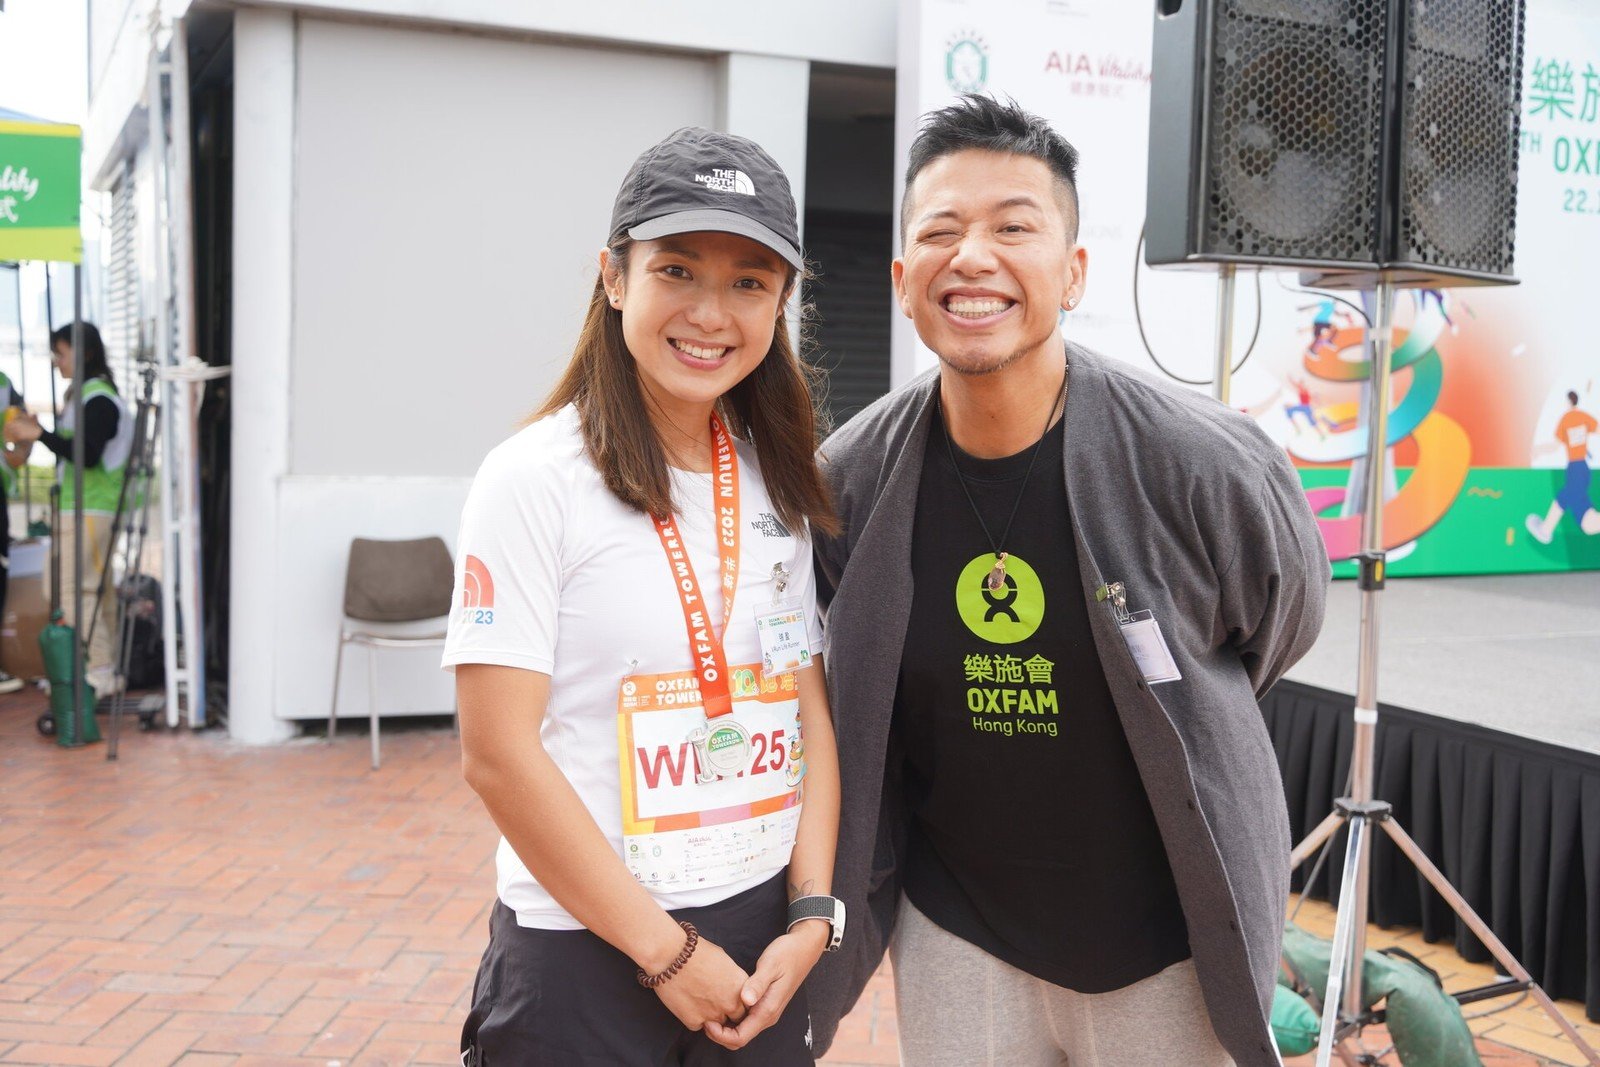 One of Oxfam’s long-time supporters and ambassadors, Chui Chi-long (Siu Fay) and Event Ambassador, Vivi Cheung, made a special appearance to cheer on the participants.